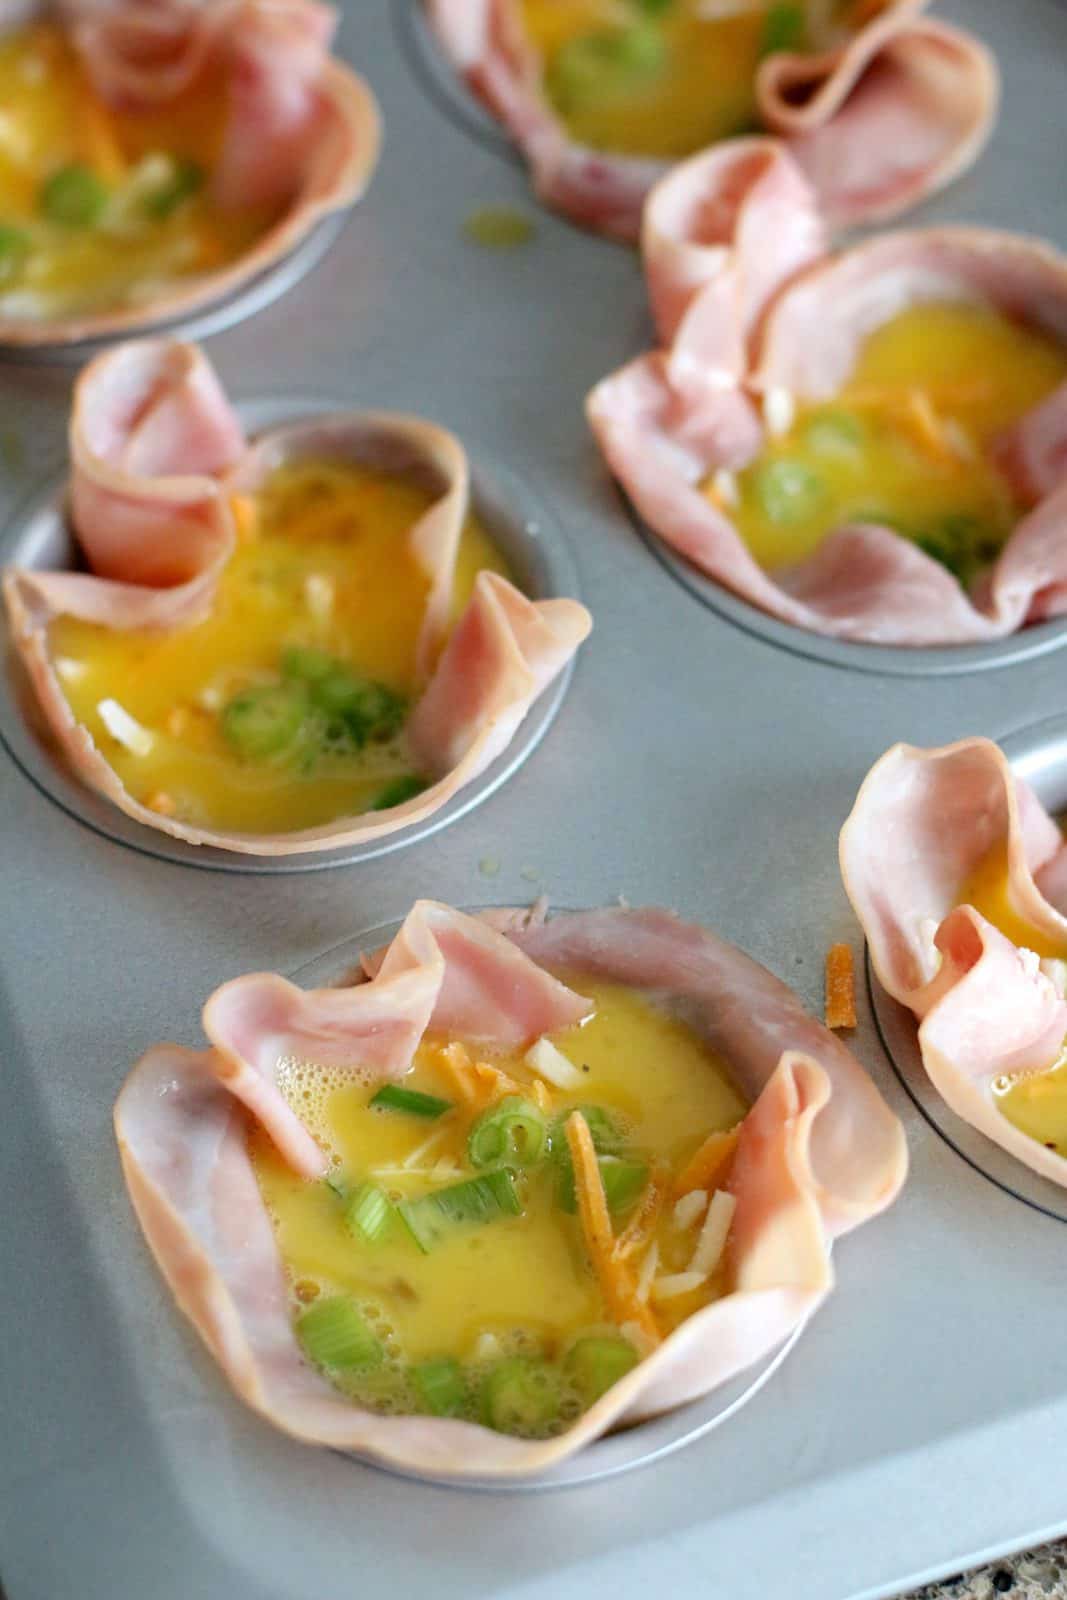 egg mixture added to ham slices in muffin tin.